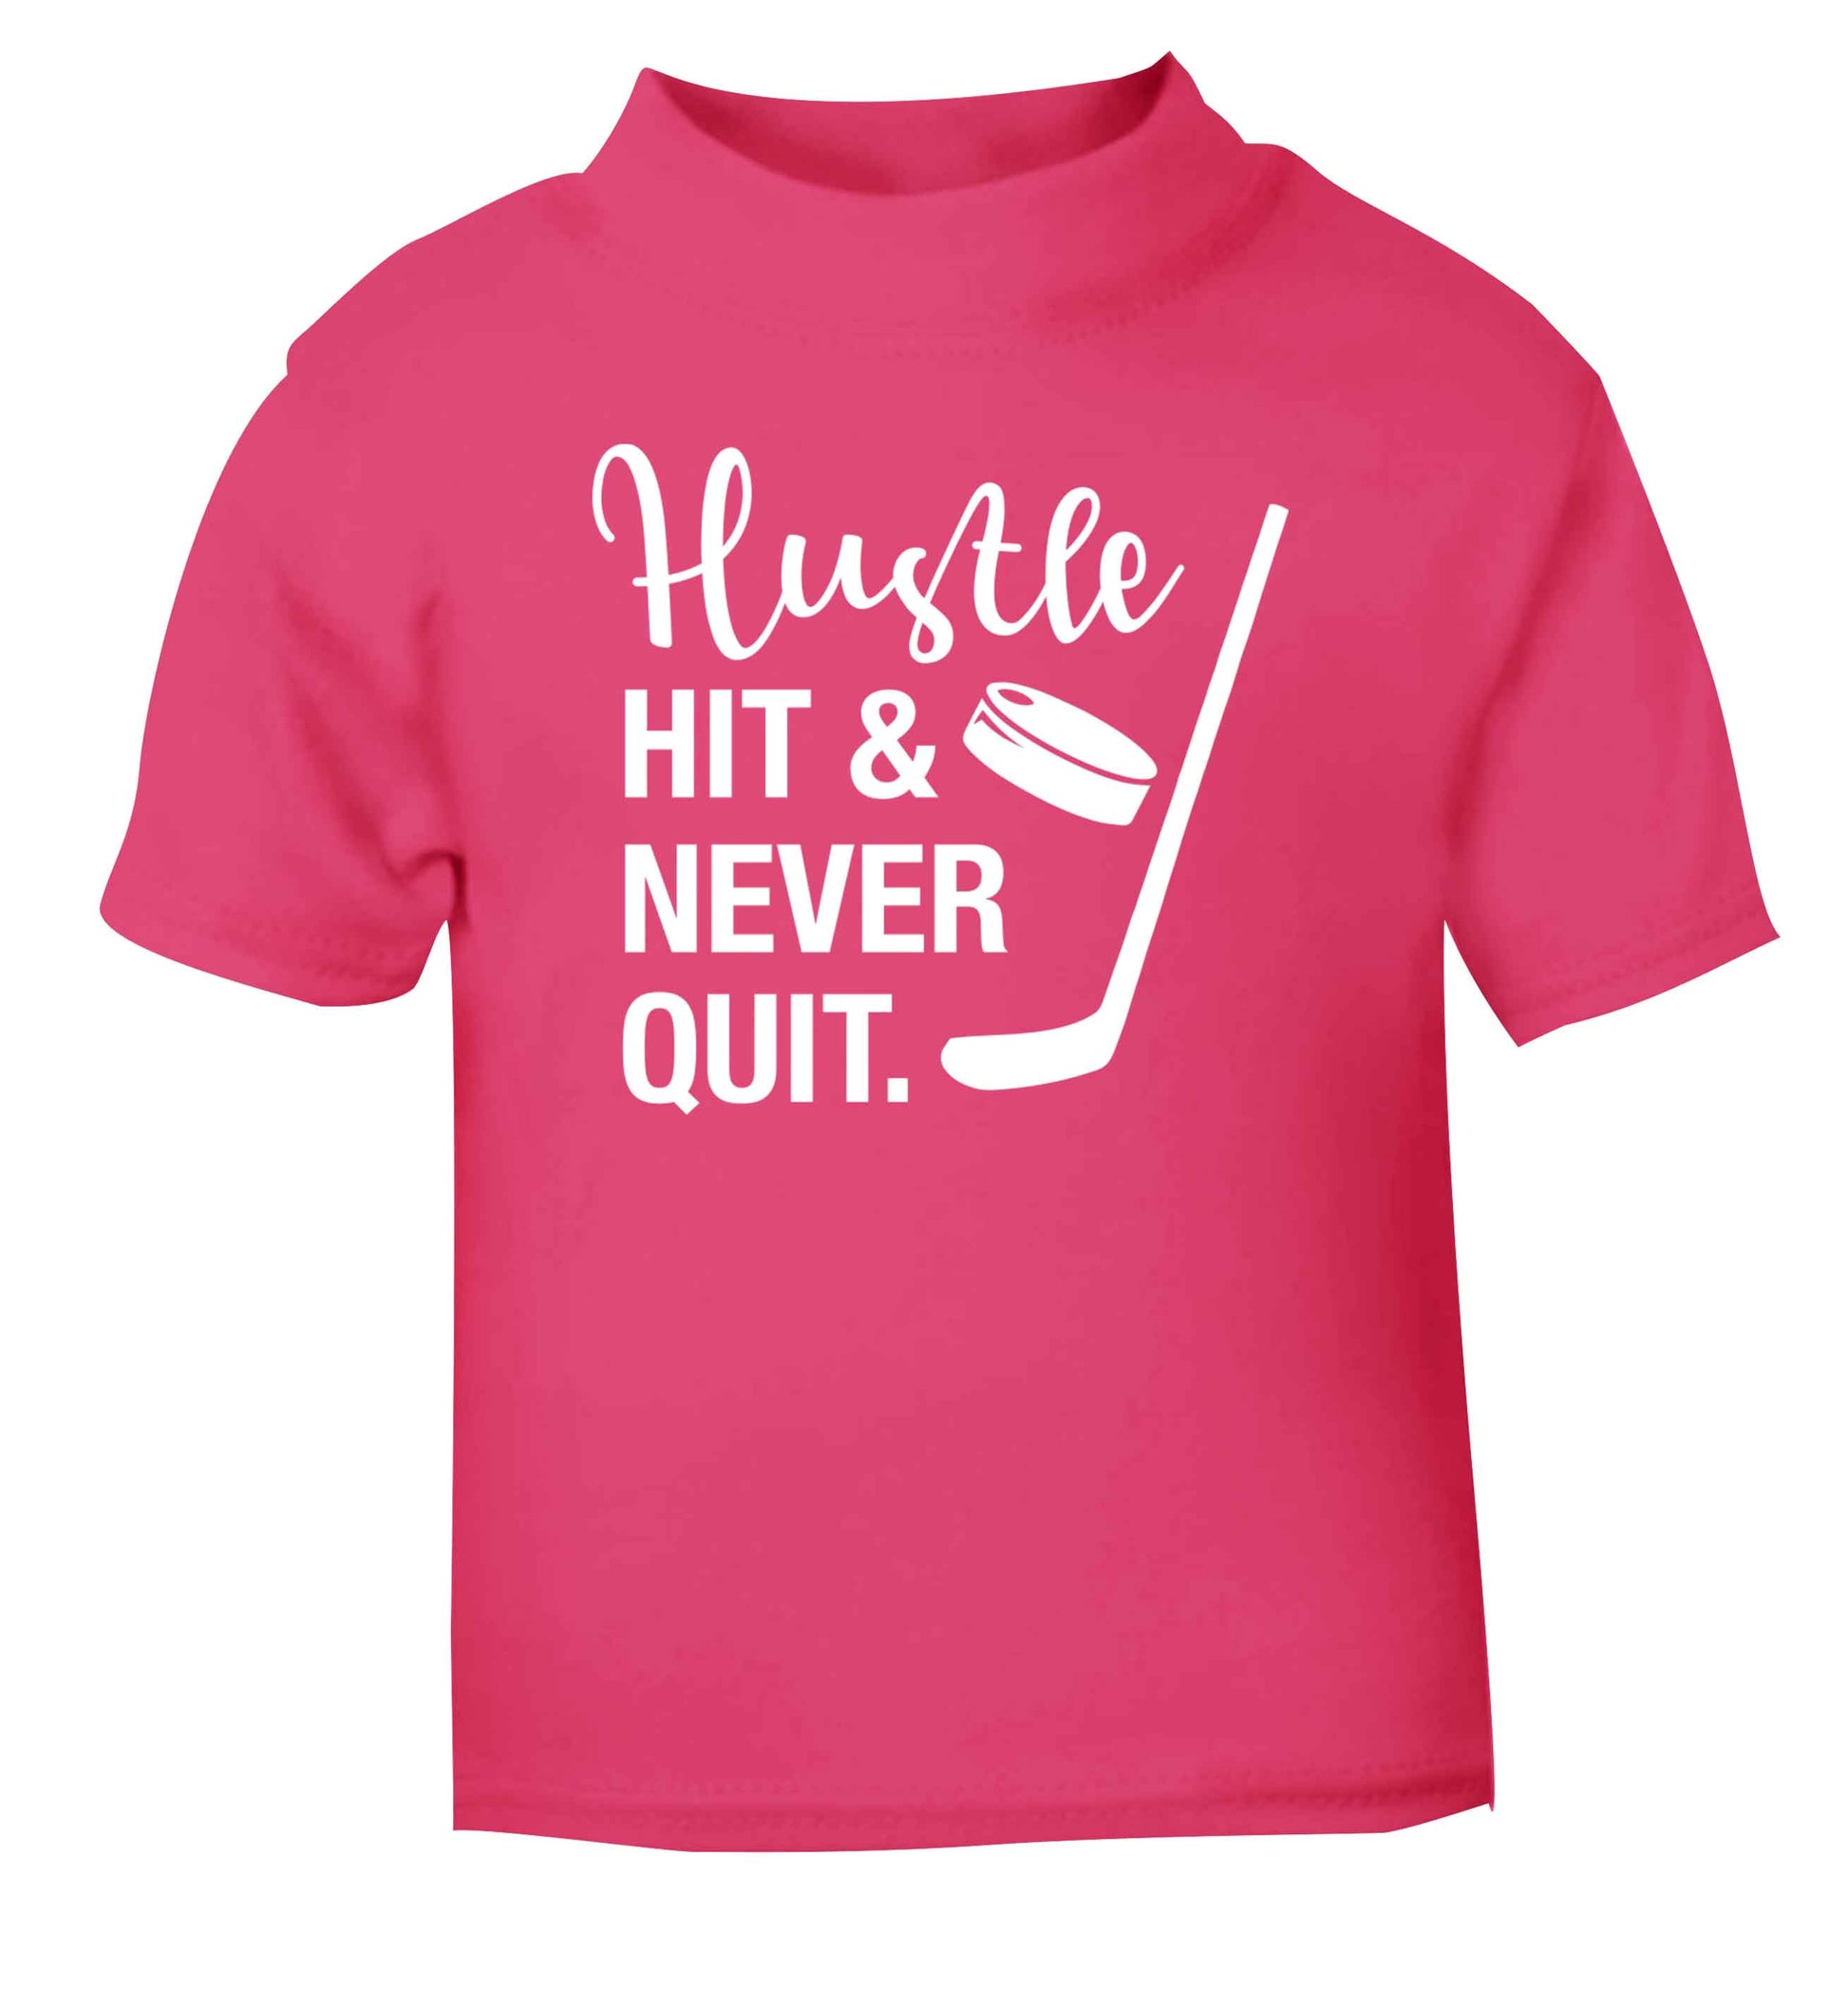 Hustle hit and never quit pink Baby Toddler Tshirt 2 Years